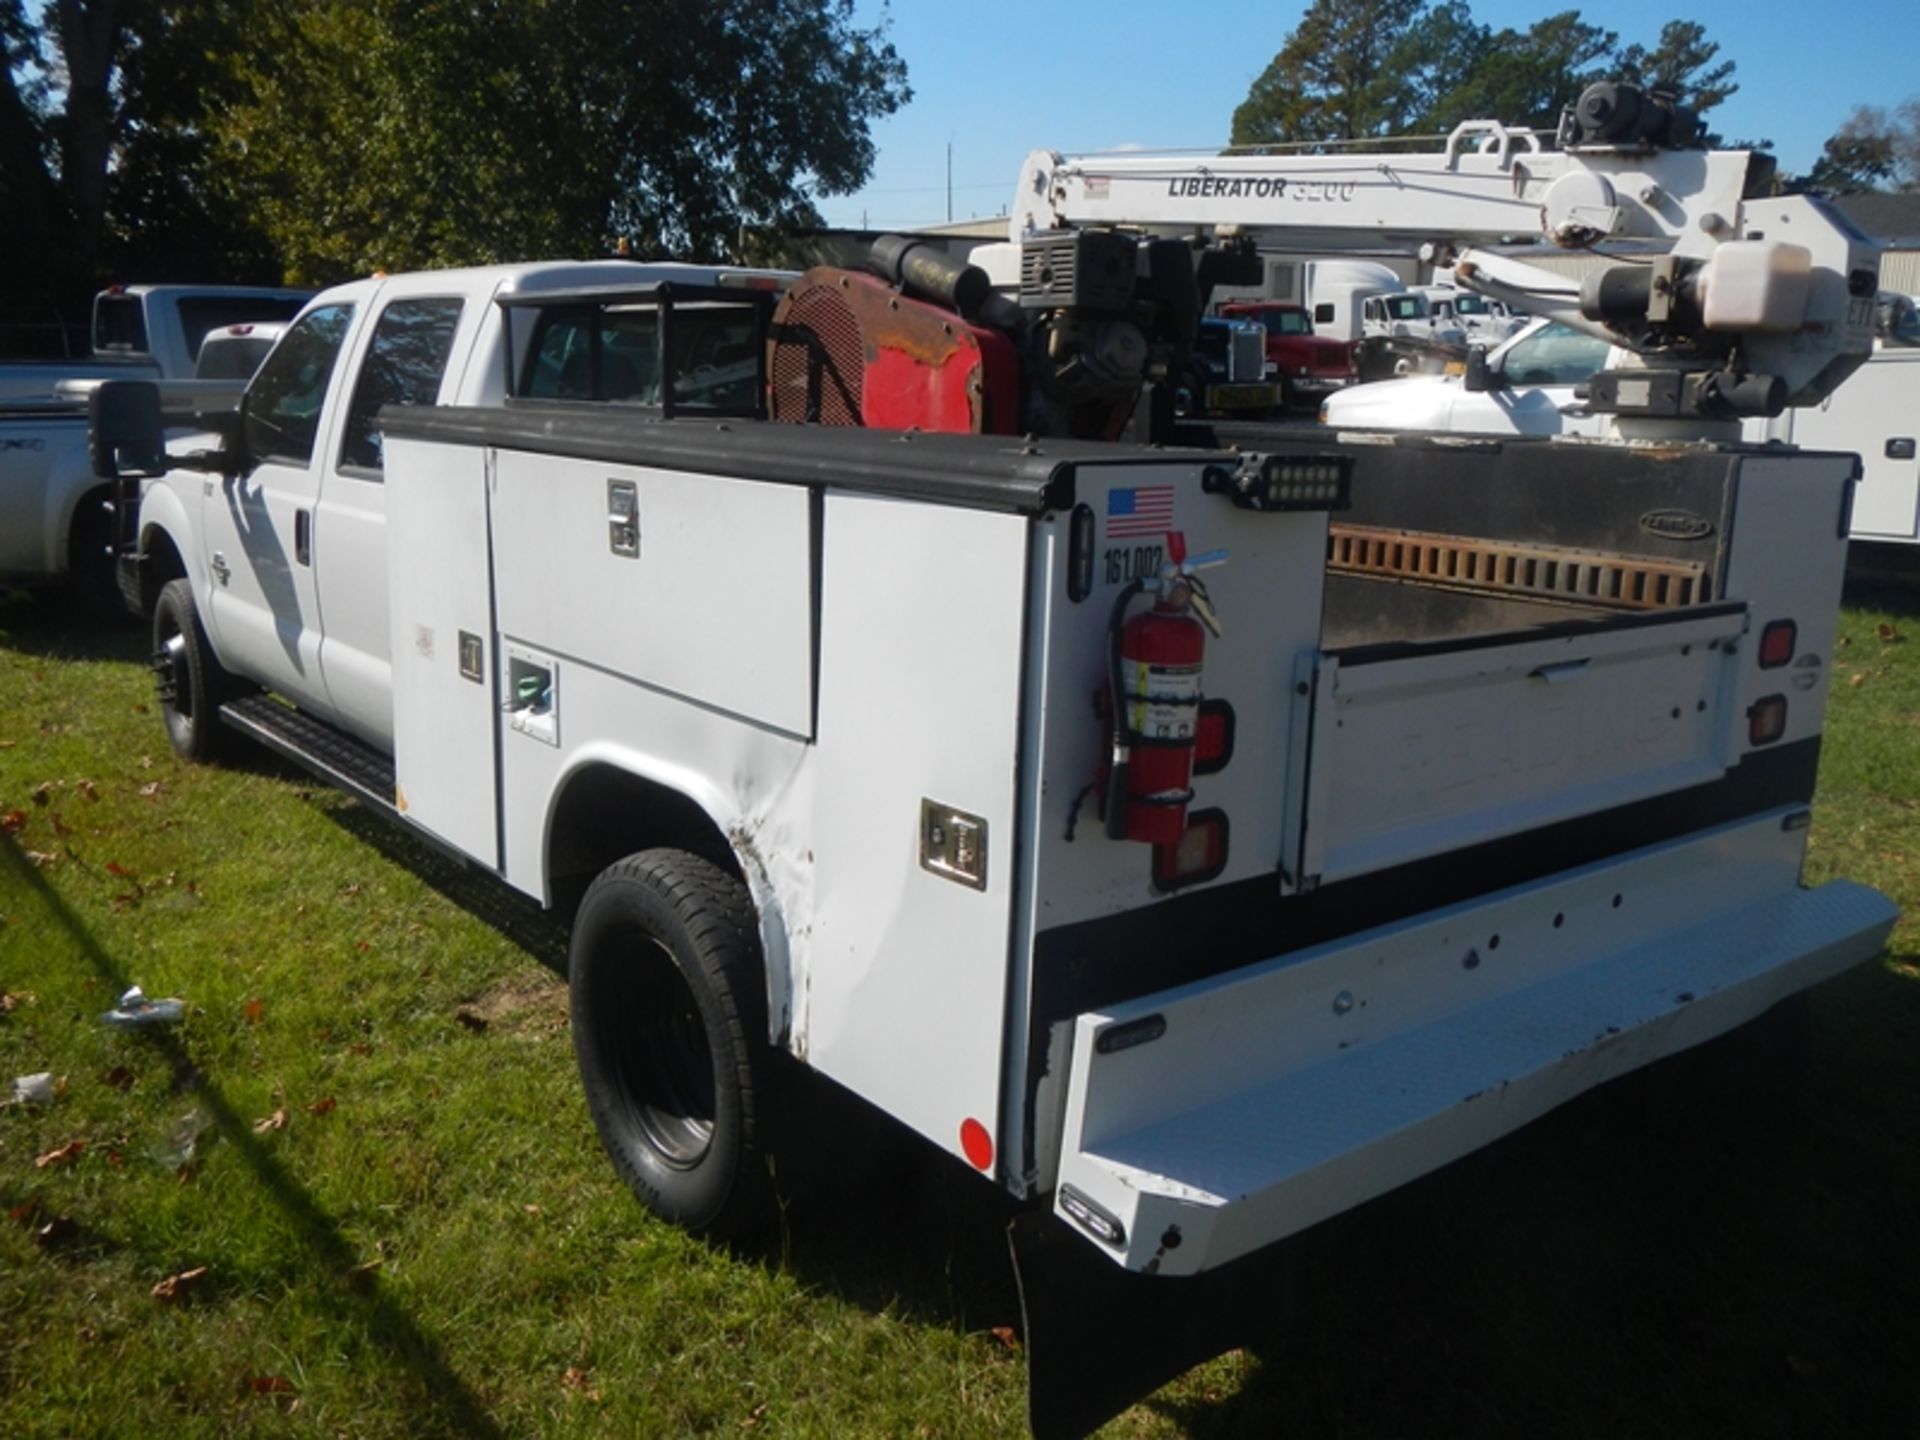 2012 FORD F-350 6.7L dsl, crew cab, 4wd, utility body with crane and air compressor - 314,136 - Image 4 of 9